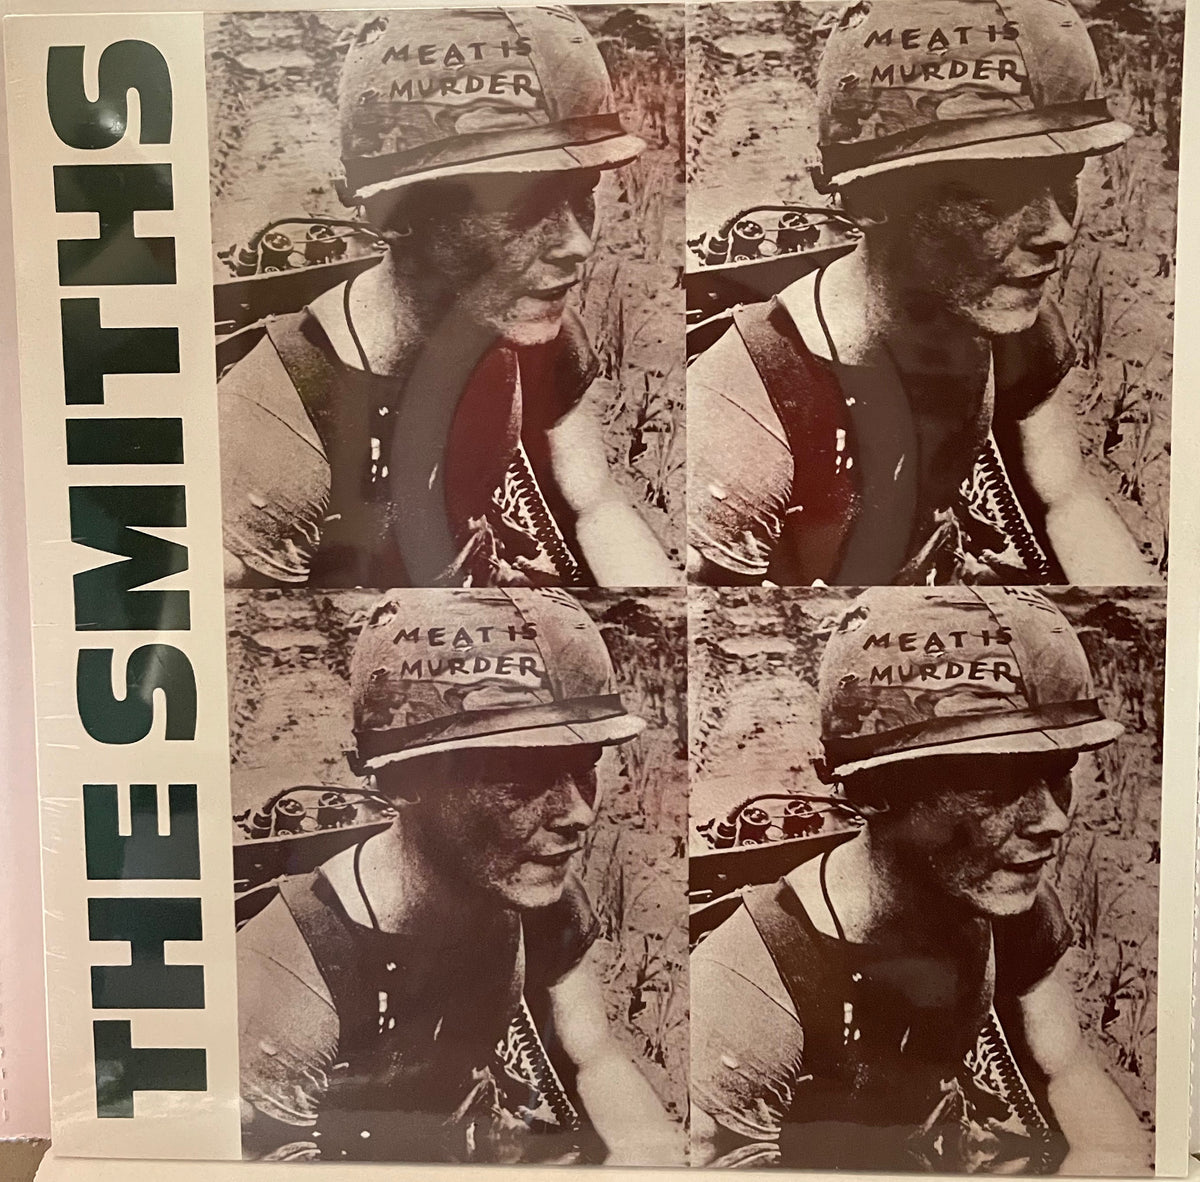 THE SMITHS – Meat is Murder 180g LP NEW/Sealed – GarageRock 